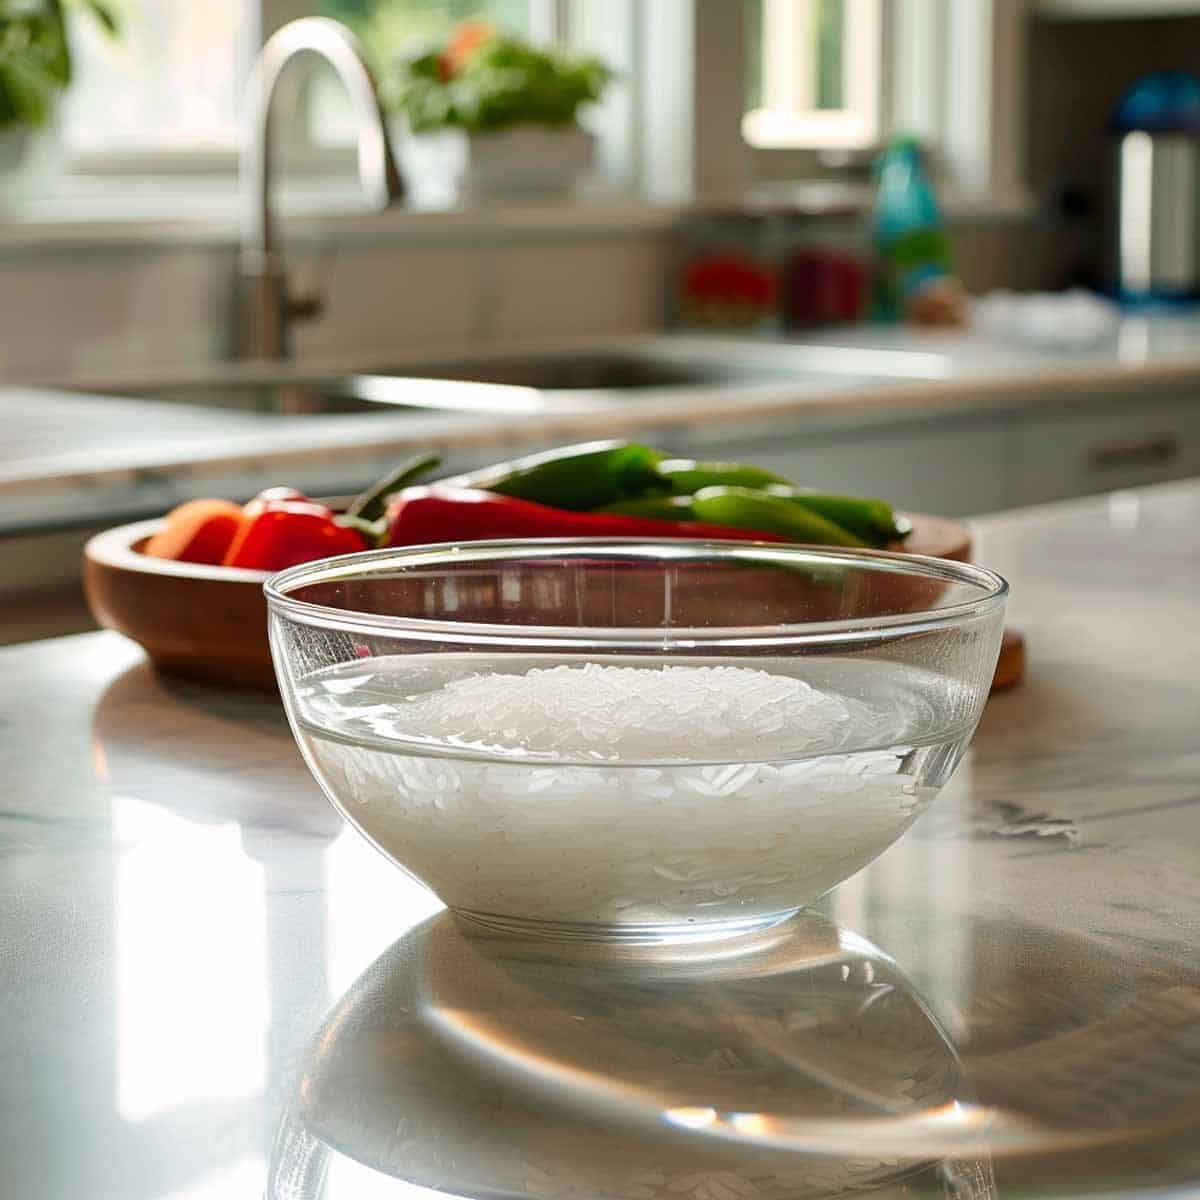 An image showing a bowl of jasmine rice being in clear, running water. The rice is in a transparent bowl, This process helps in removing excess starch from the rice, ensuring it cooks up fluffy and light. The focus is on the water becoming clearer as the starch washes away, illustrating an essential step in preparing rice for cooking.